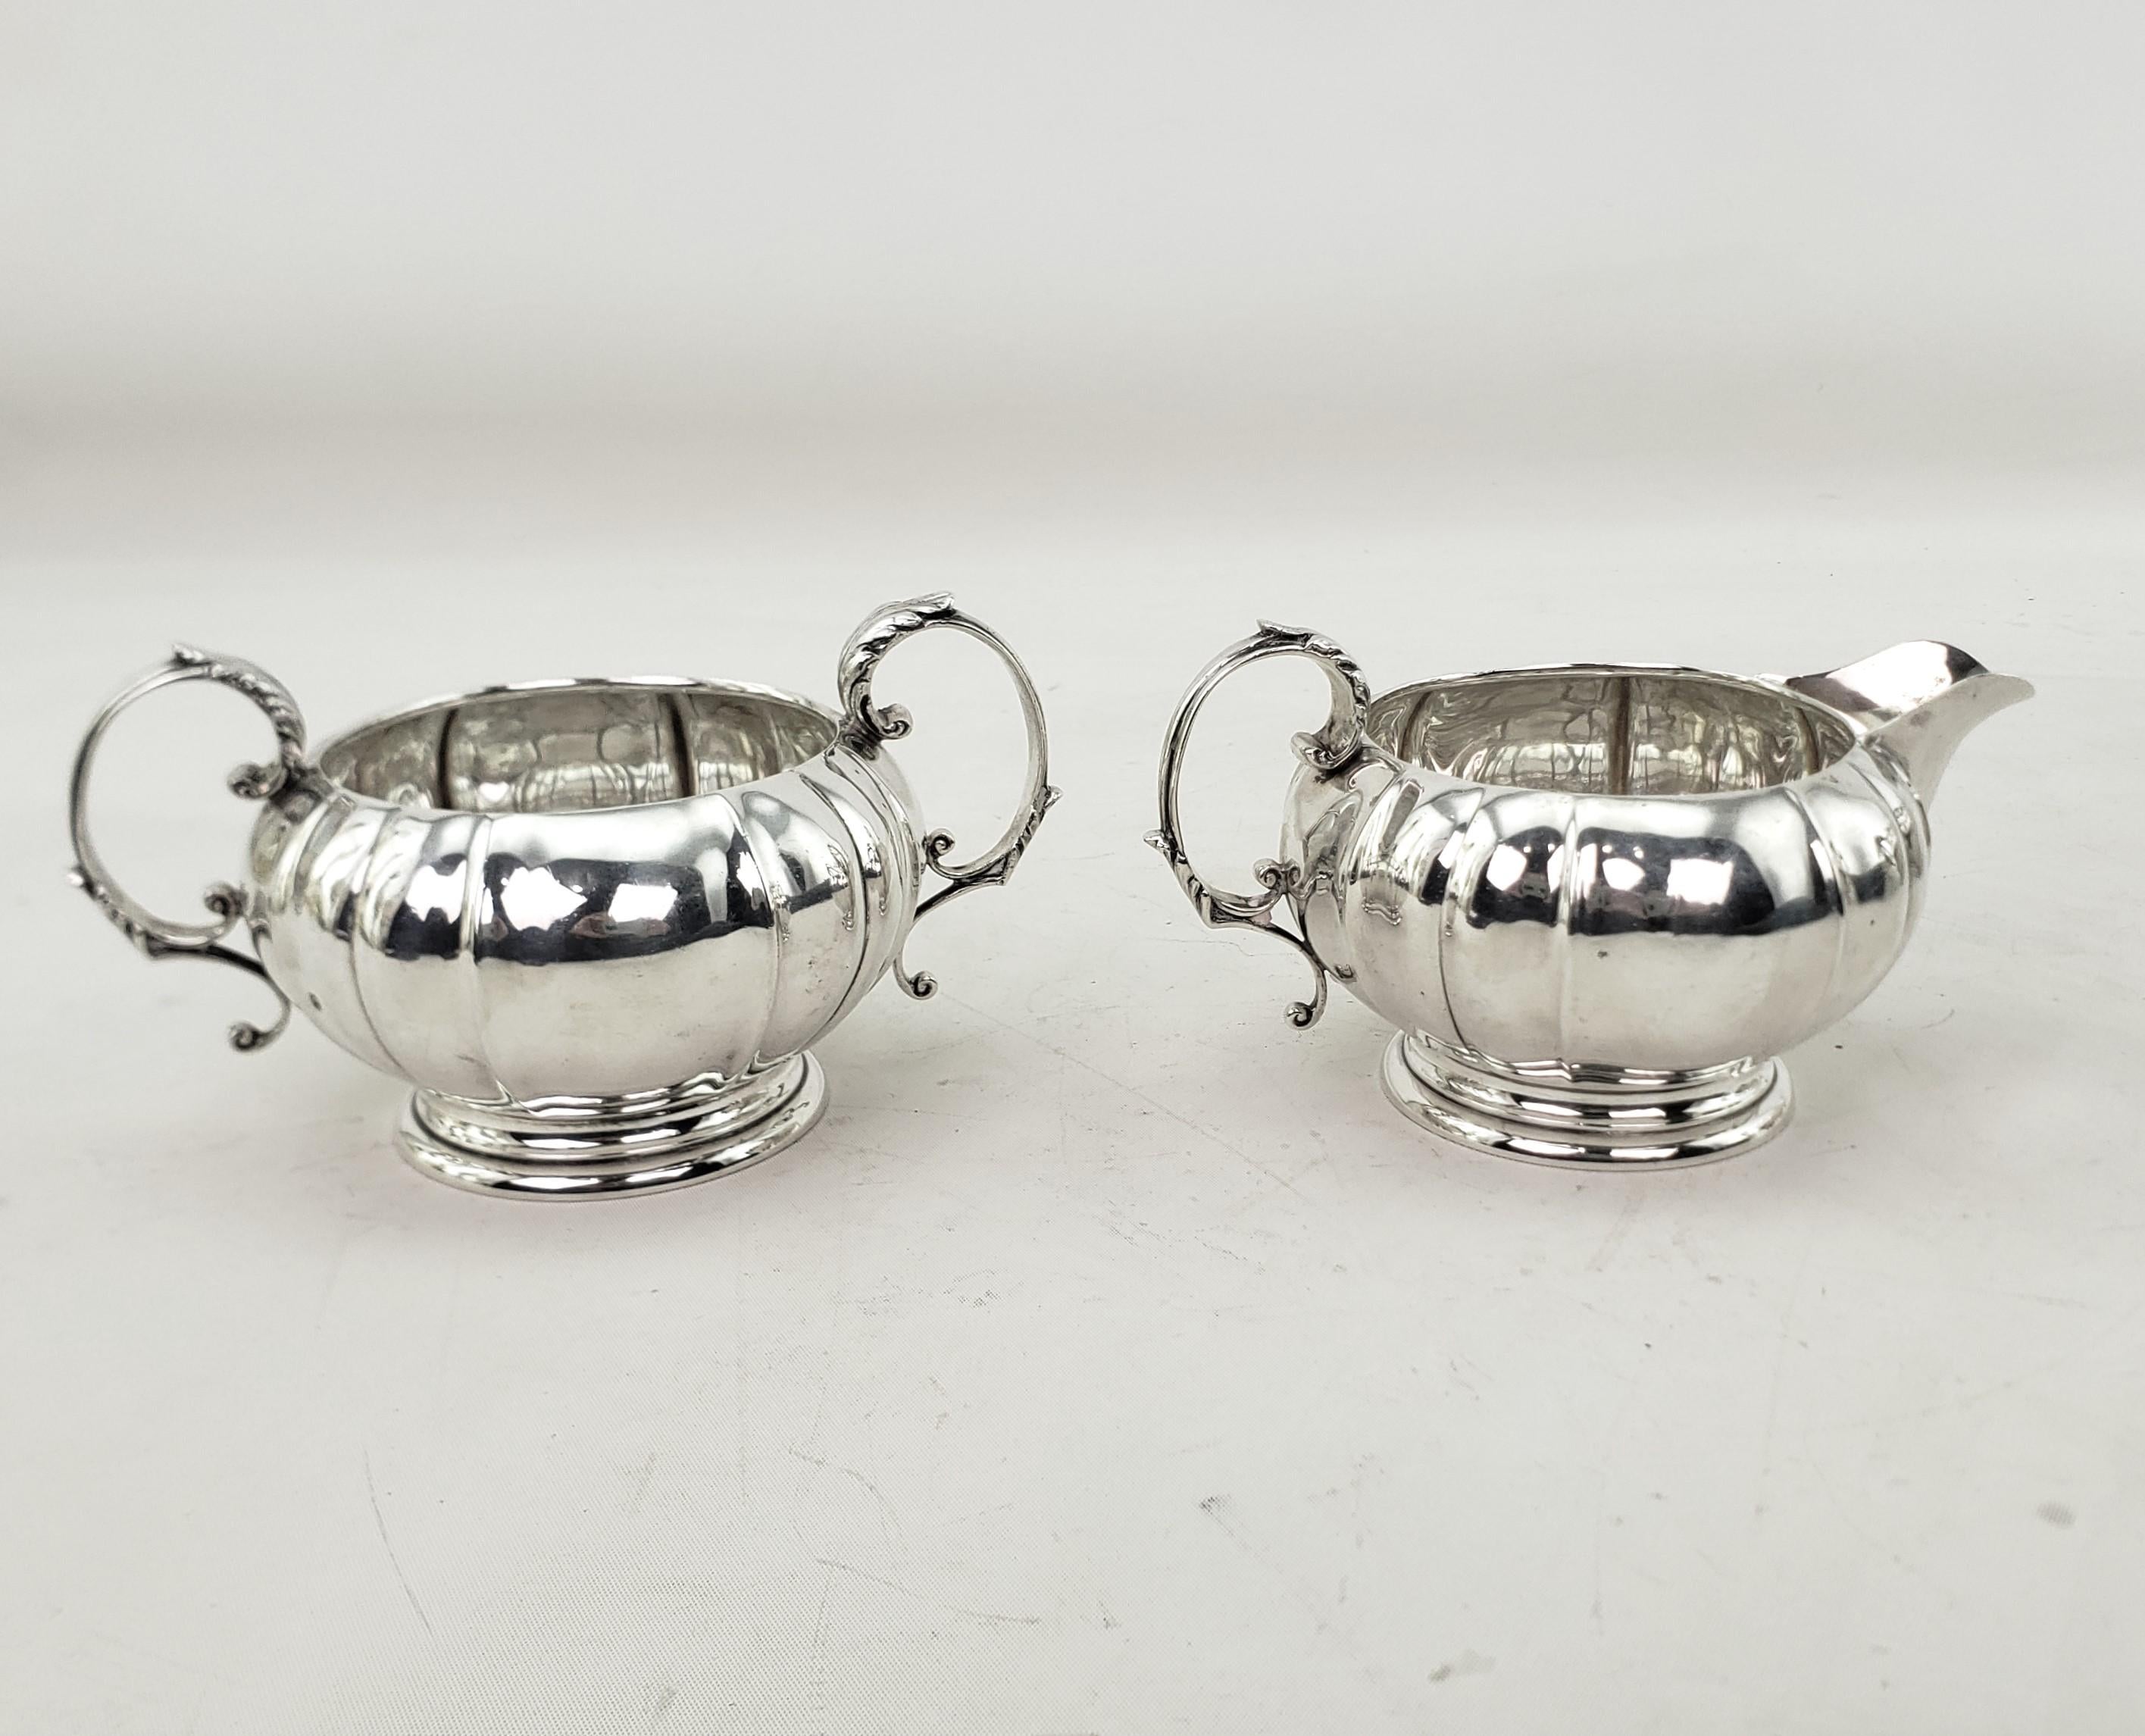 Antique Birks Sterling Silver Tea or Coffee Set with Creamer & Sugar Bowl For Sale 12